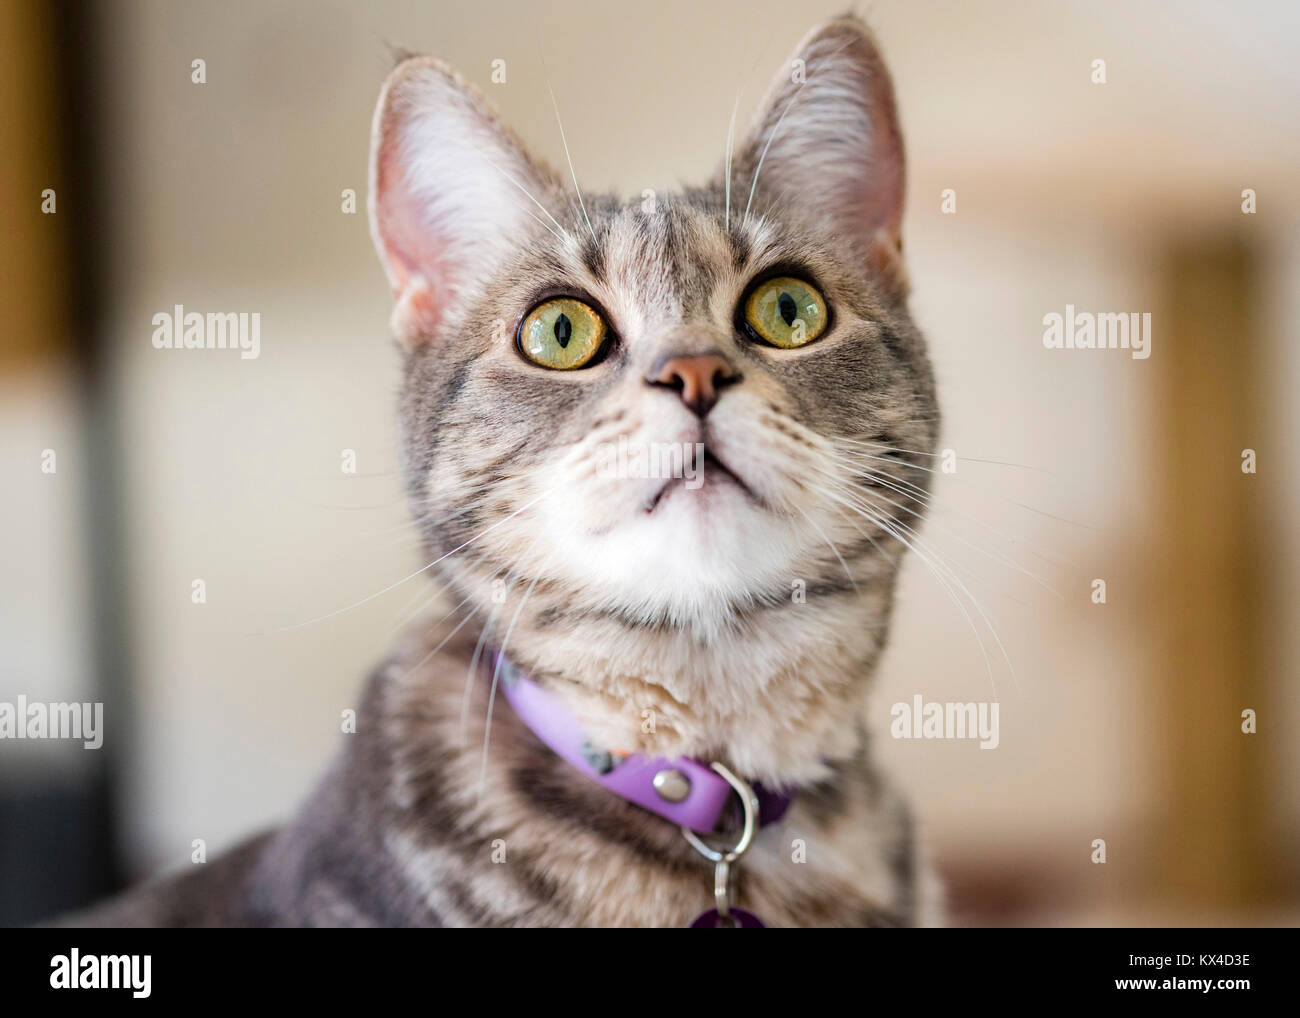 Gray striped cat closeup portrait. Grey tabby cat with green eyes looks up. Stock Photo